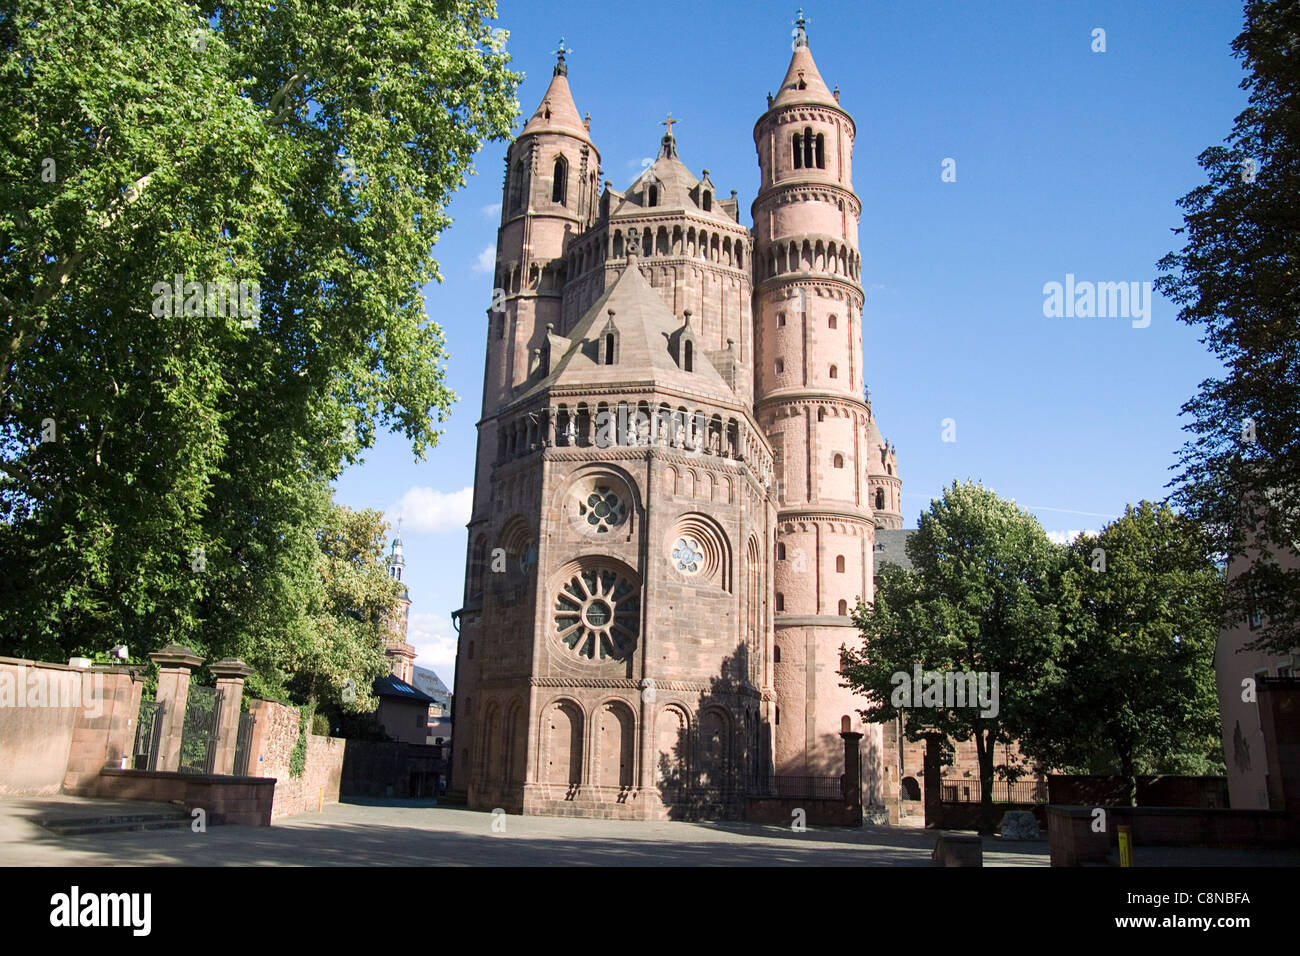 Germany, Rhineland-Palatinate, Worms, Cathedral of St. Peter Stock Photo